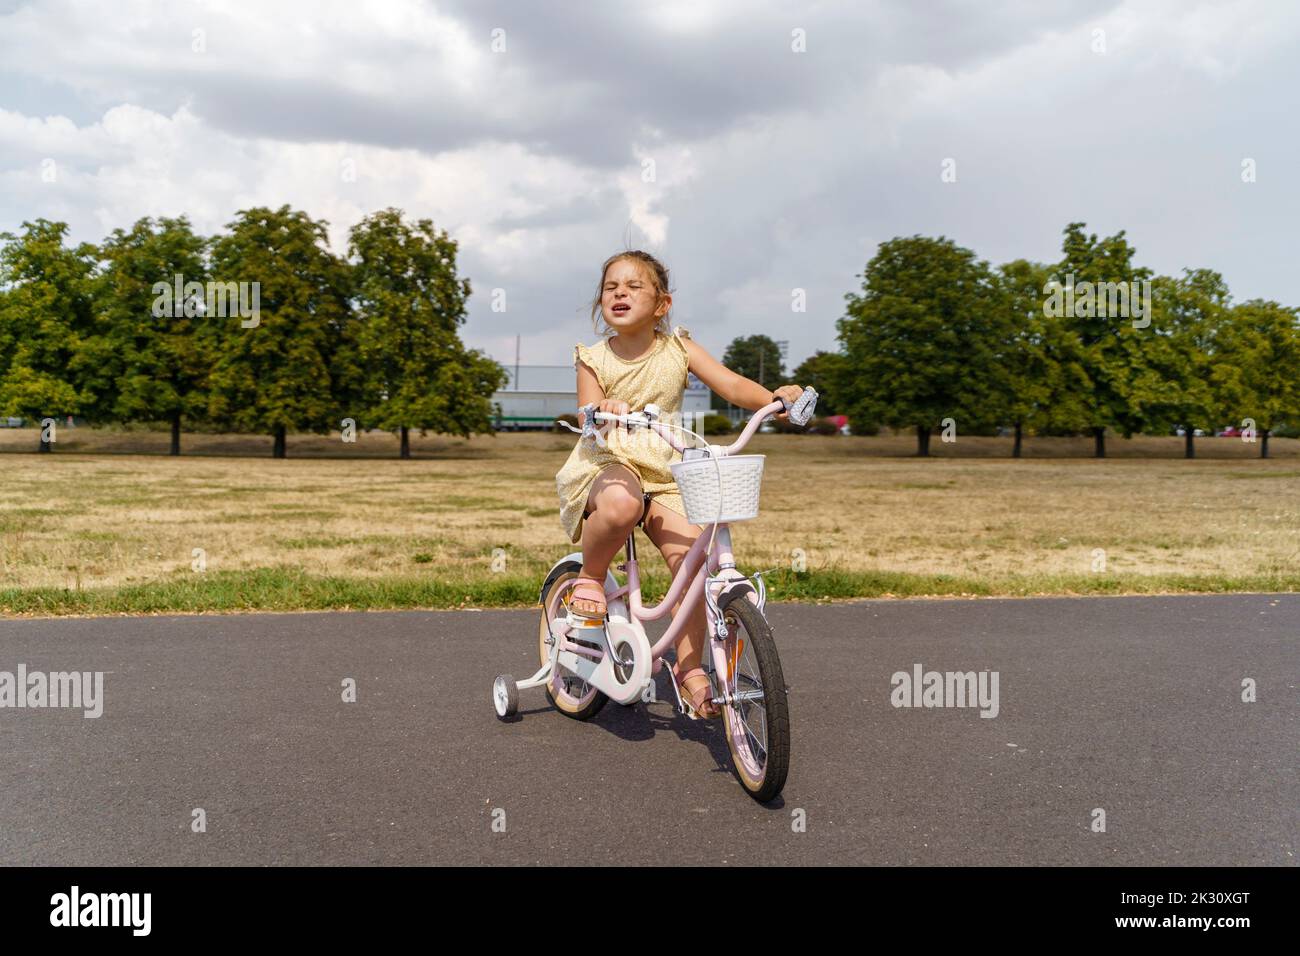 Girl cycling on road at park Stock Photo